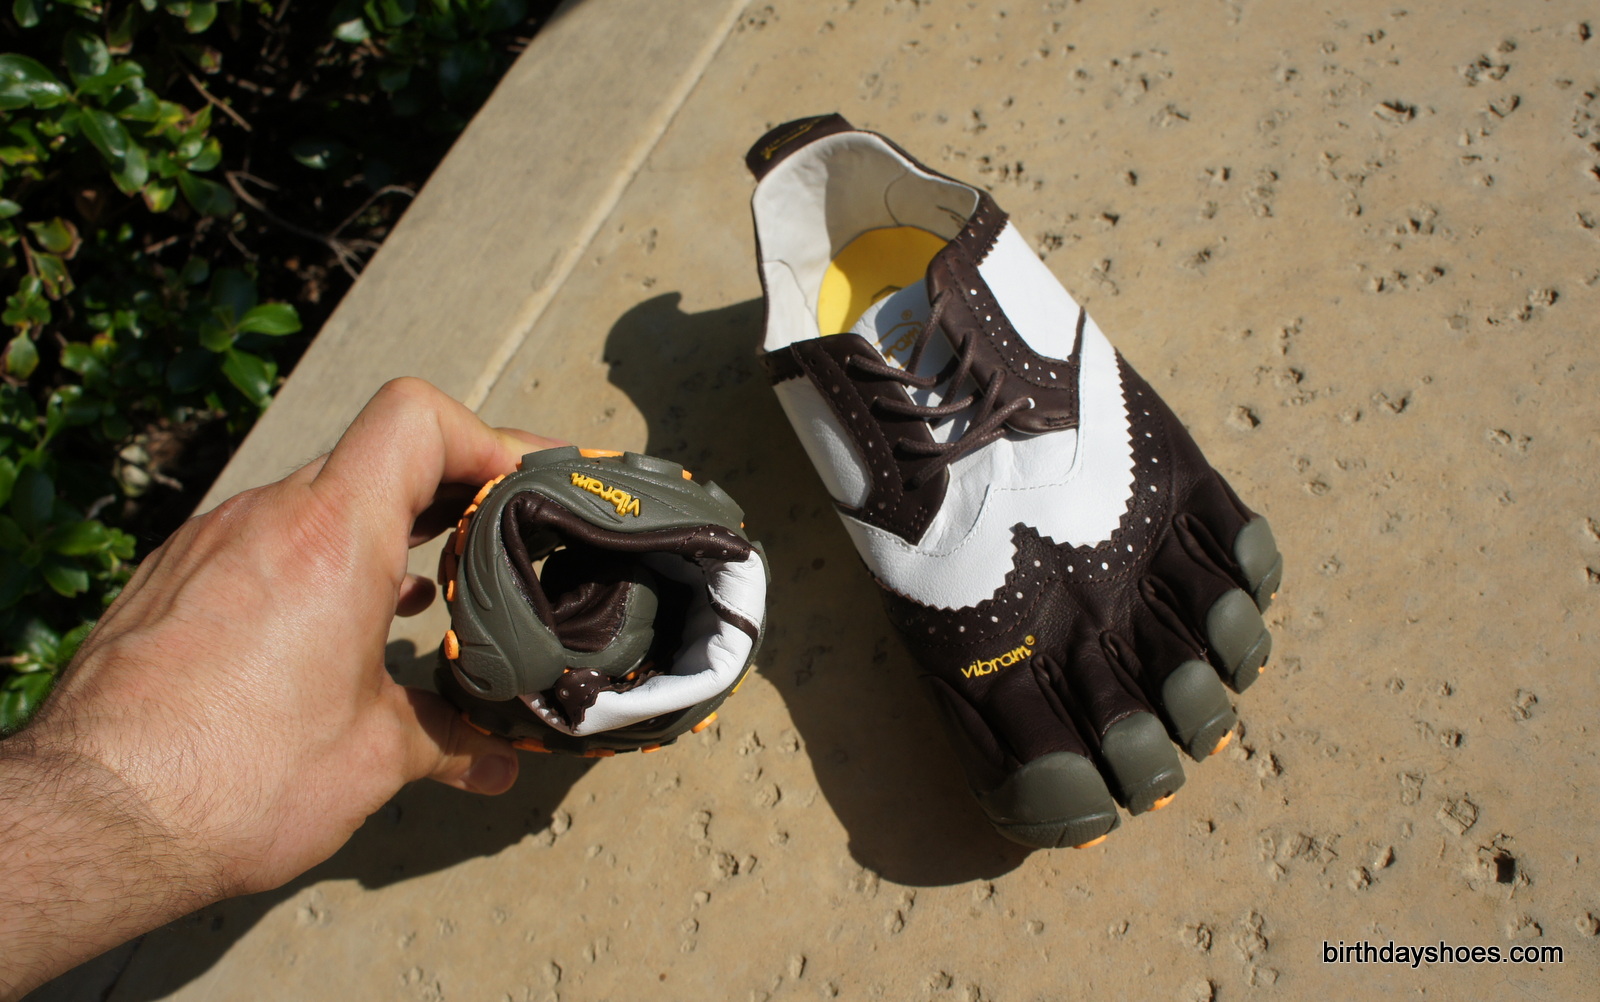 Like other Vibram soles, the LR is very flexible